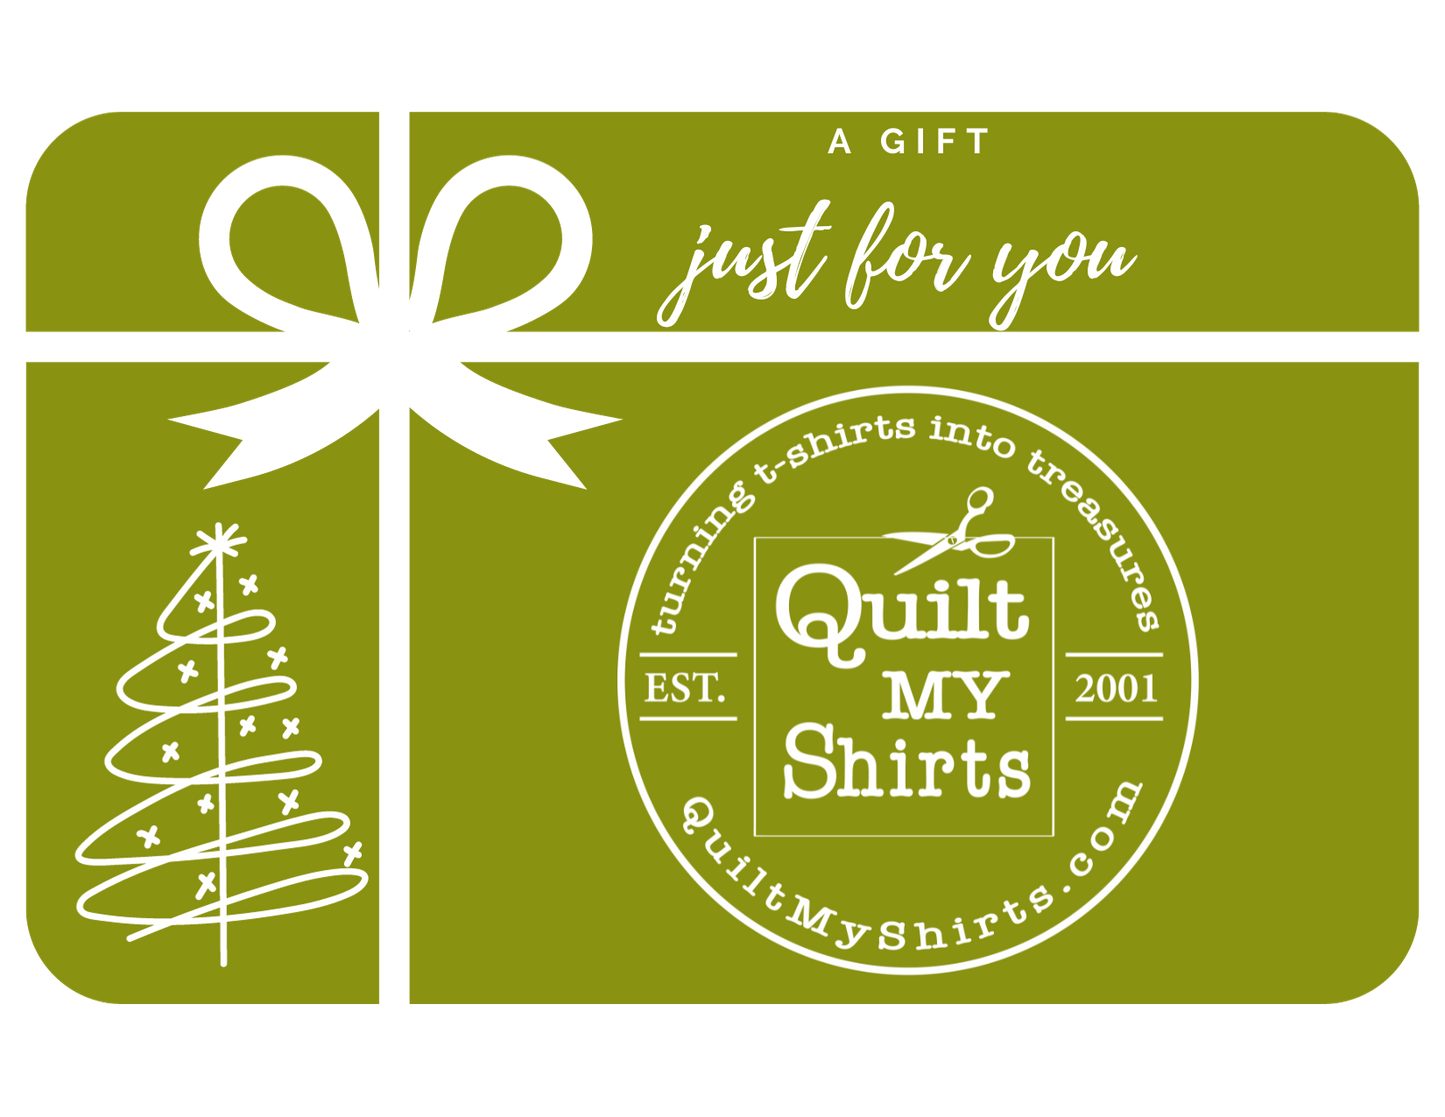 Quilt My Shirts - Gift Card